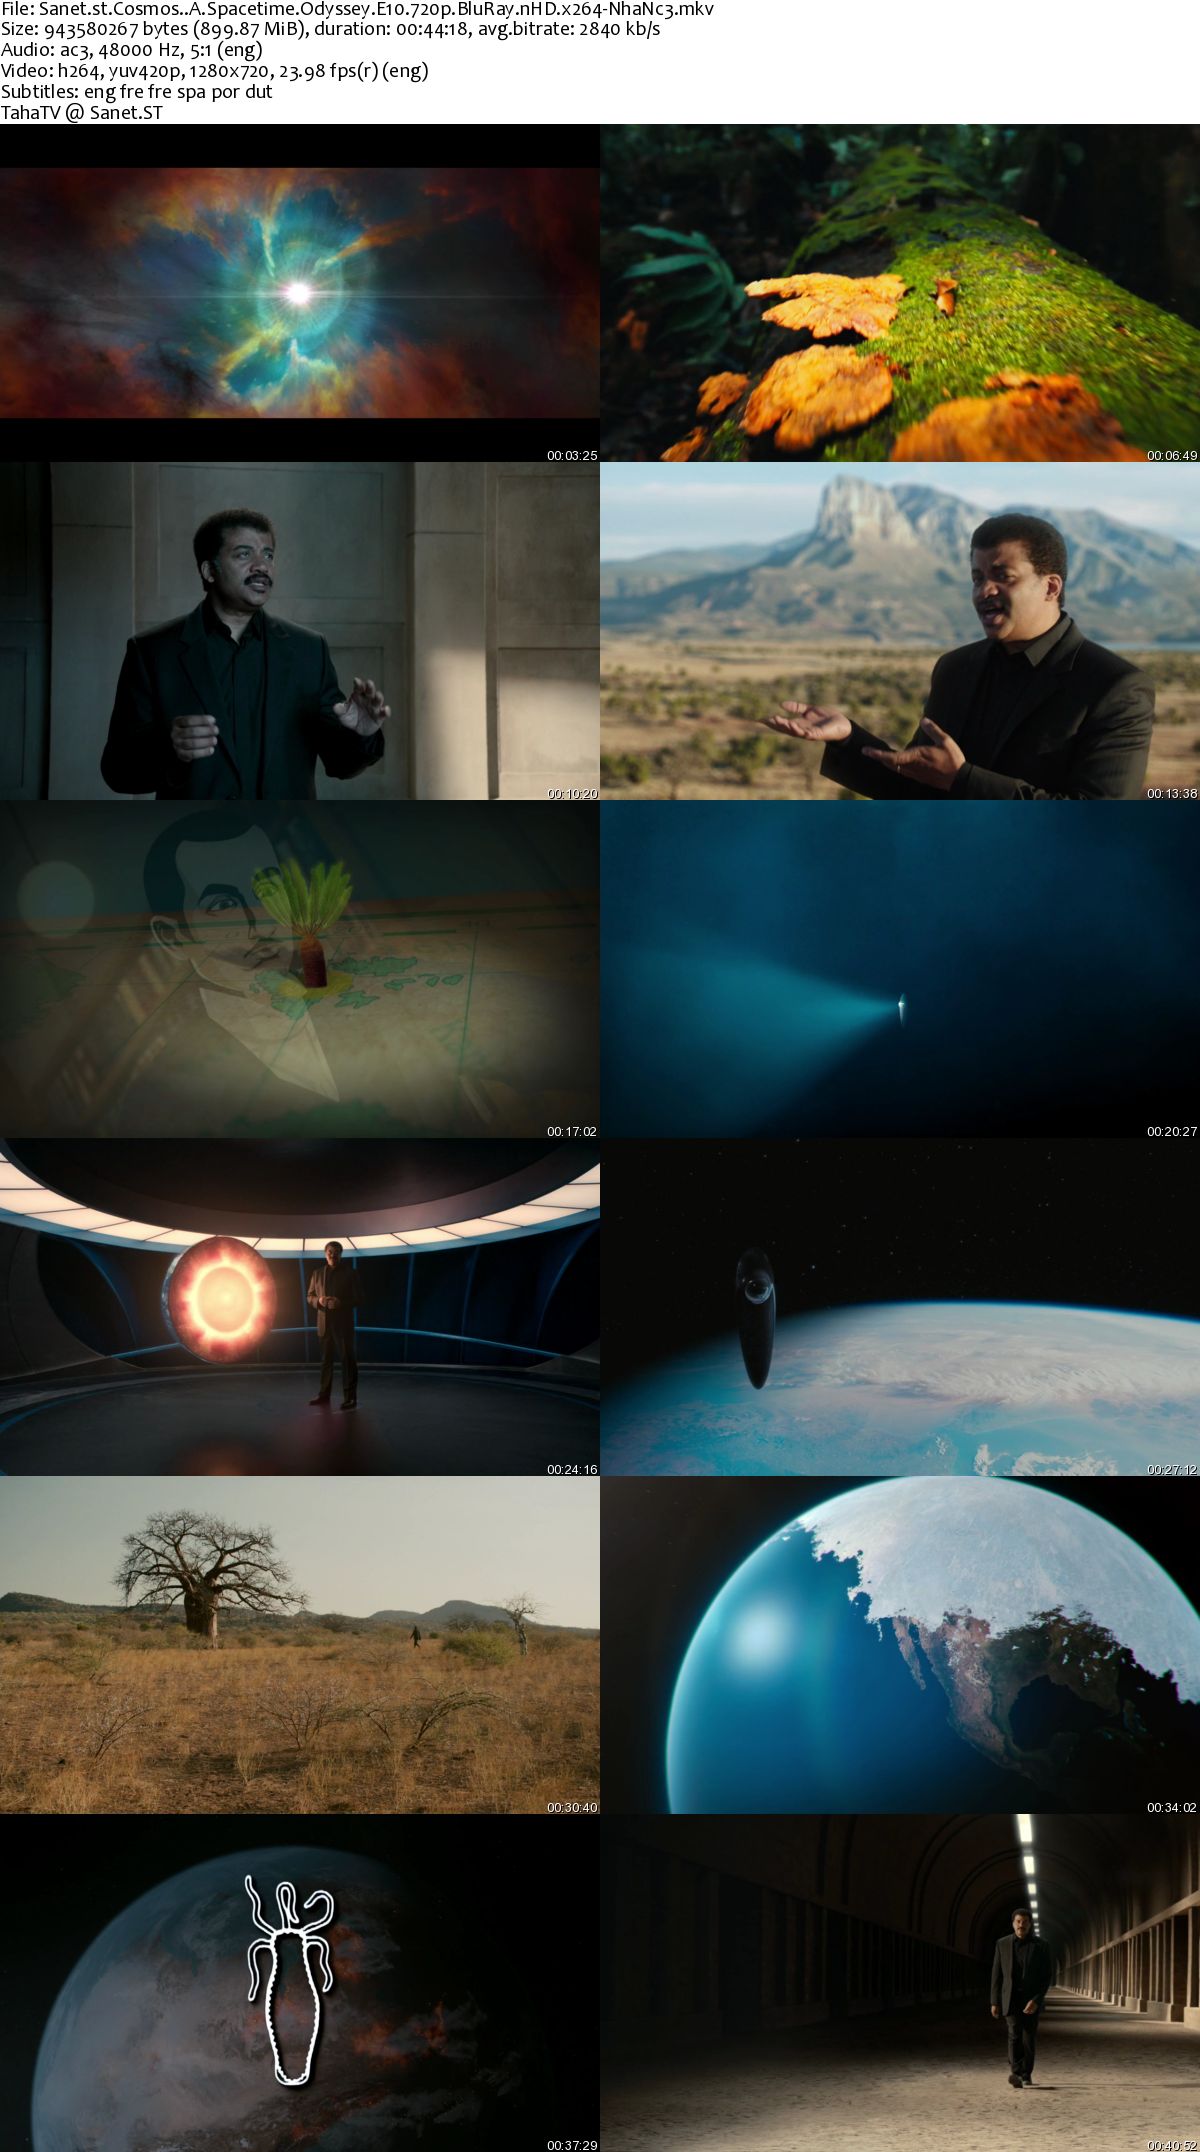 cosmos a spacetime odyssey cast